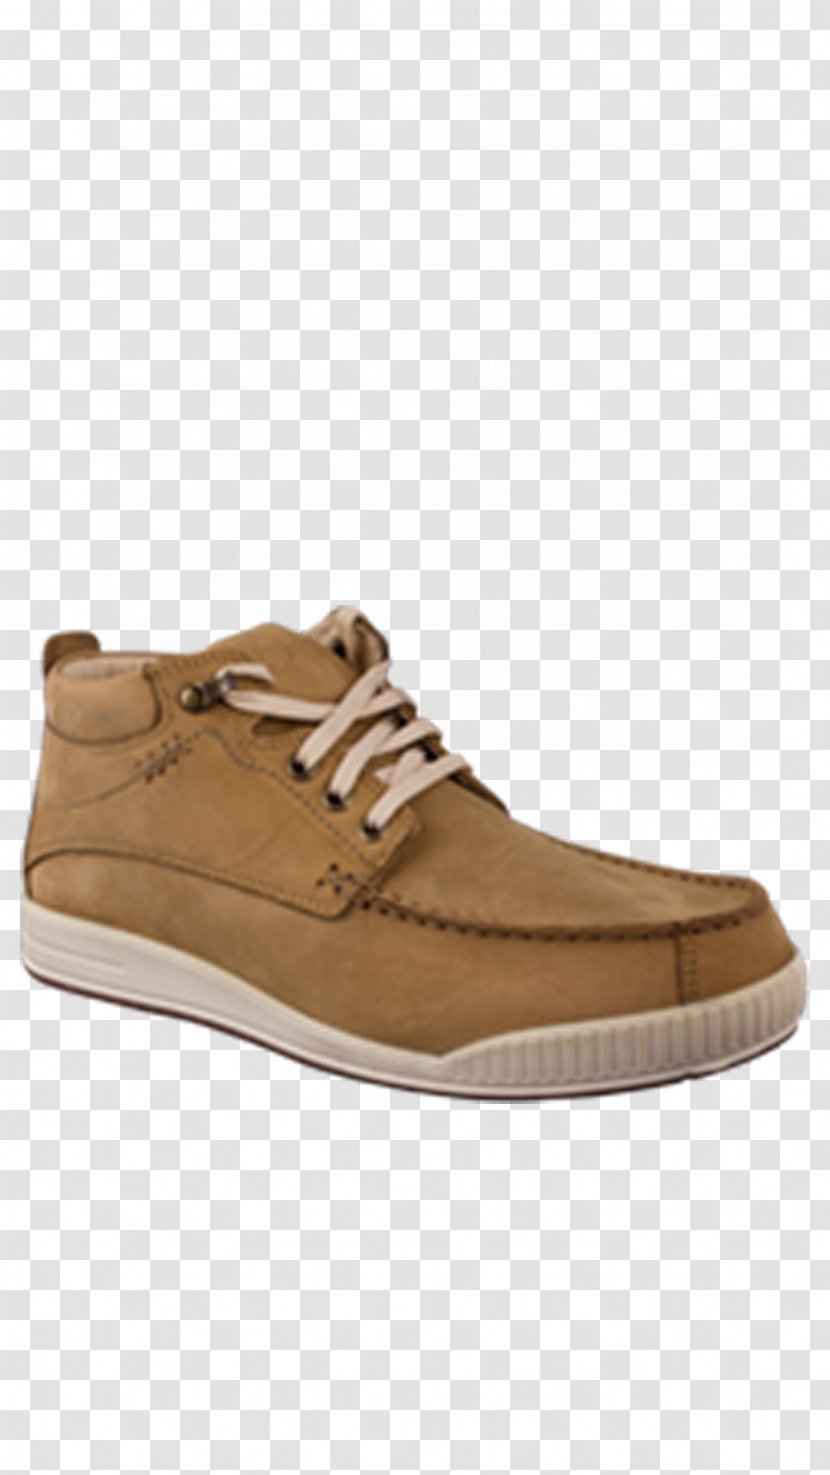 Dress Shoe Boot Sneakers Casual - Camel Transparent PNG